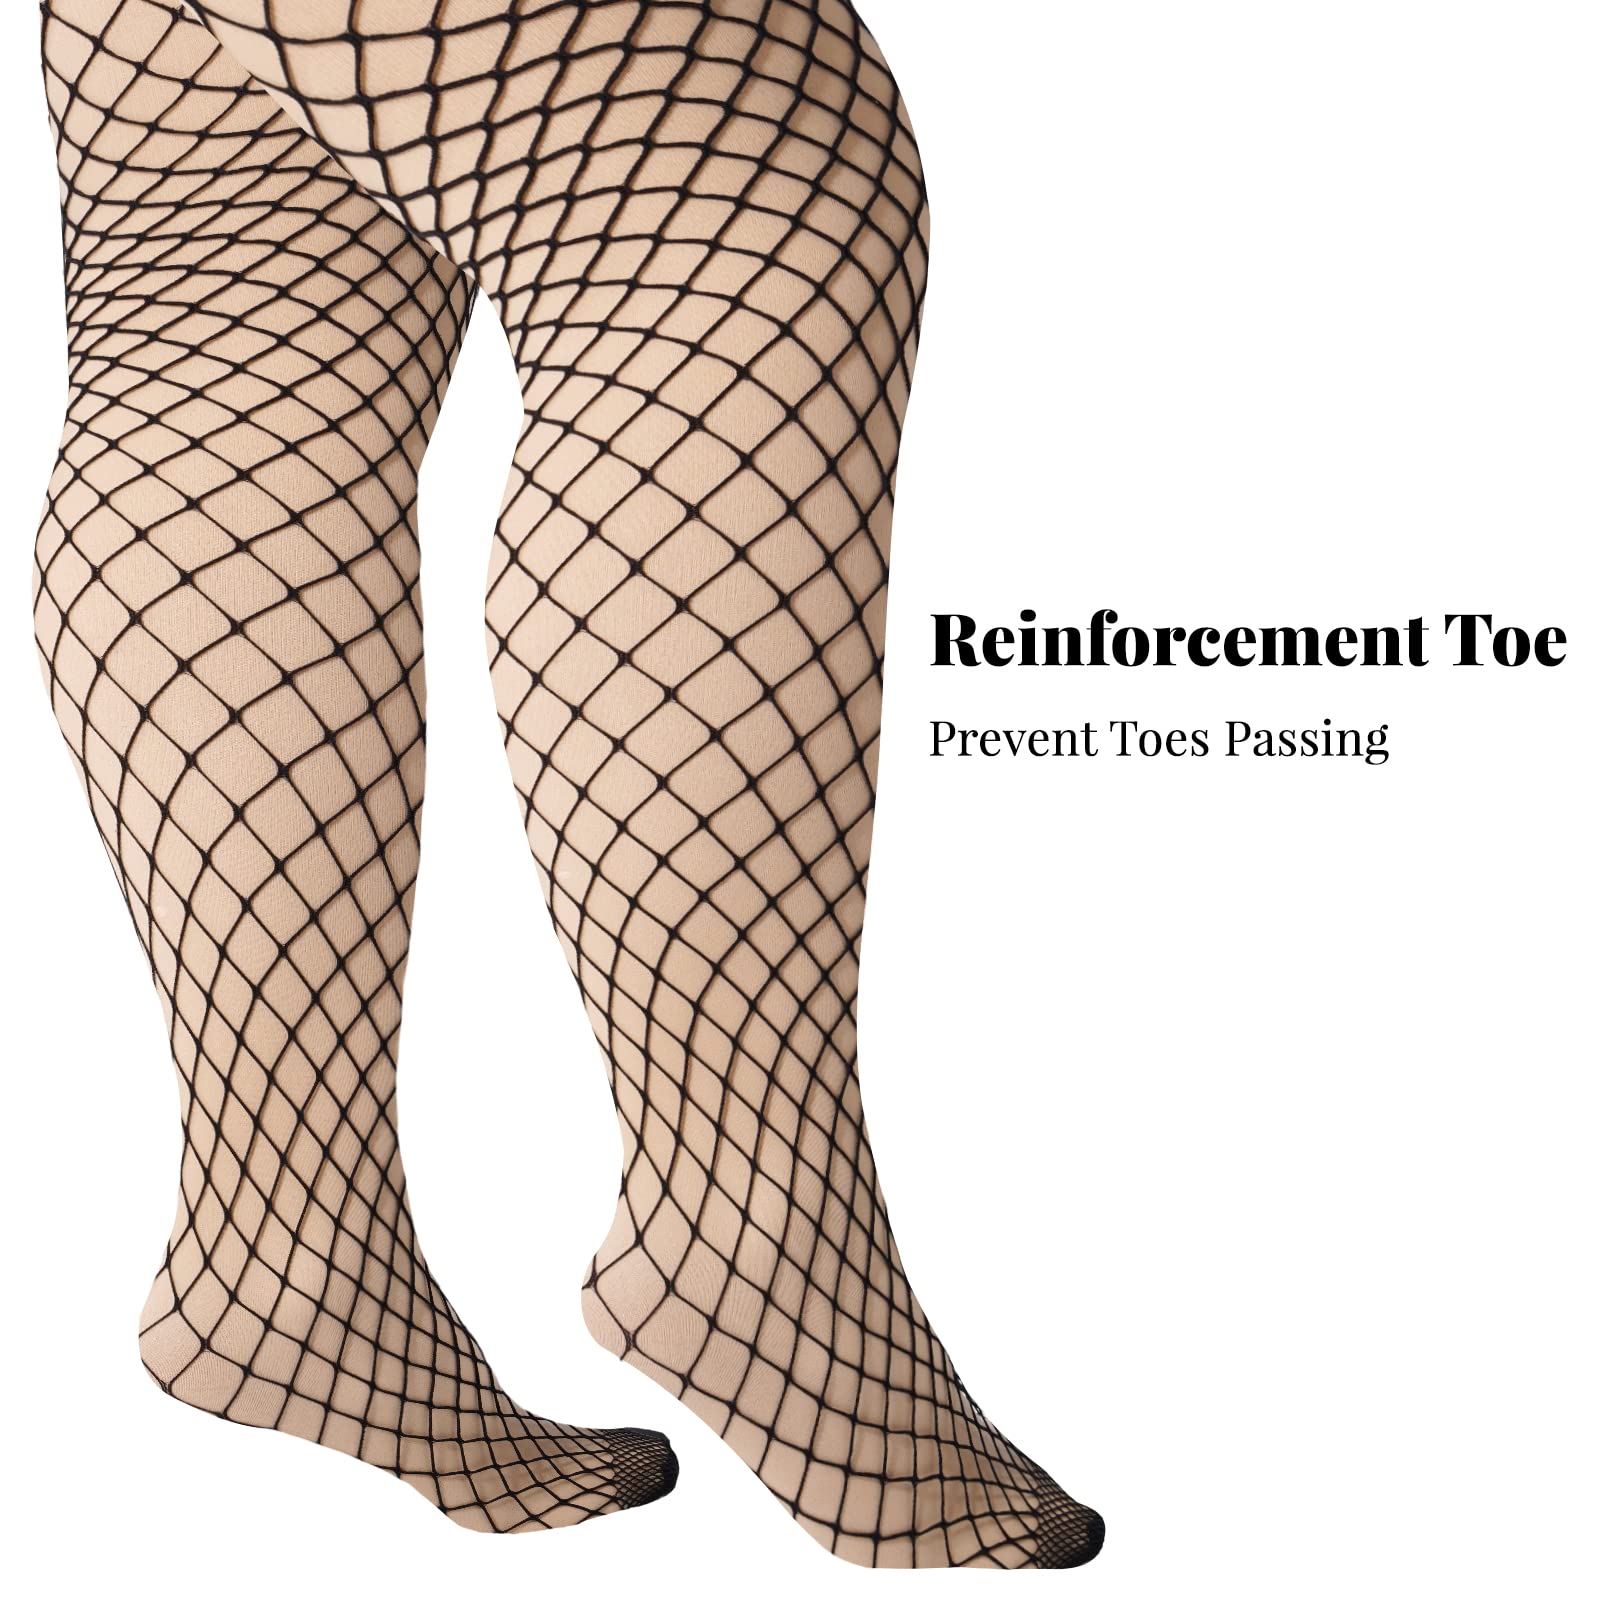 Plus Size Fishnet Stockings Sheer Silicone Lace - Black Small Mesh